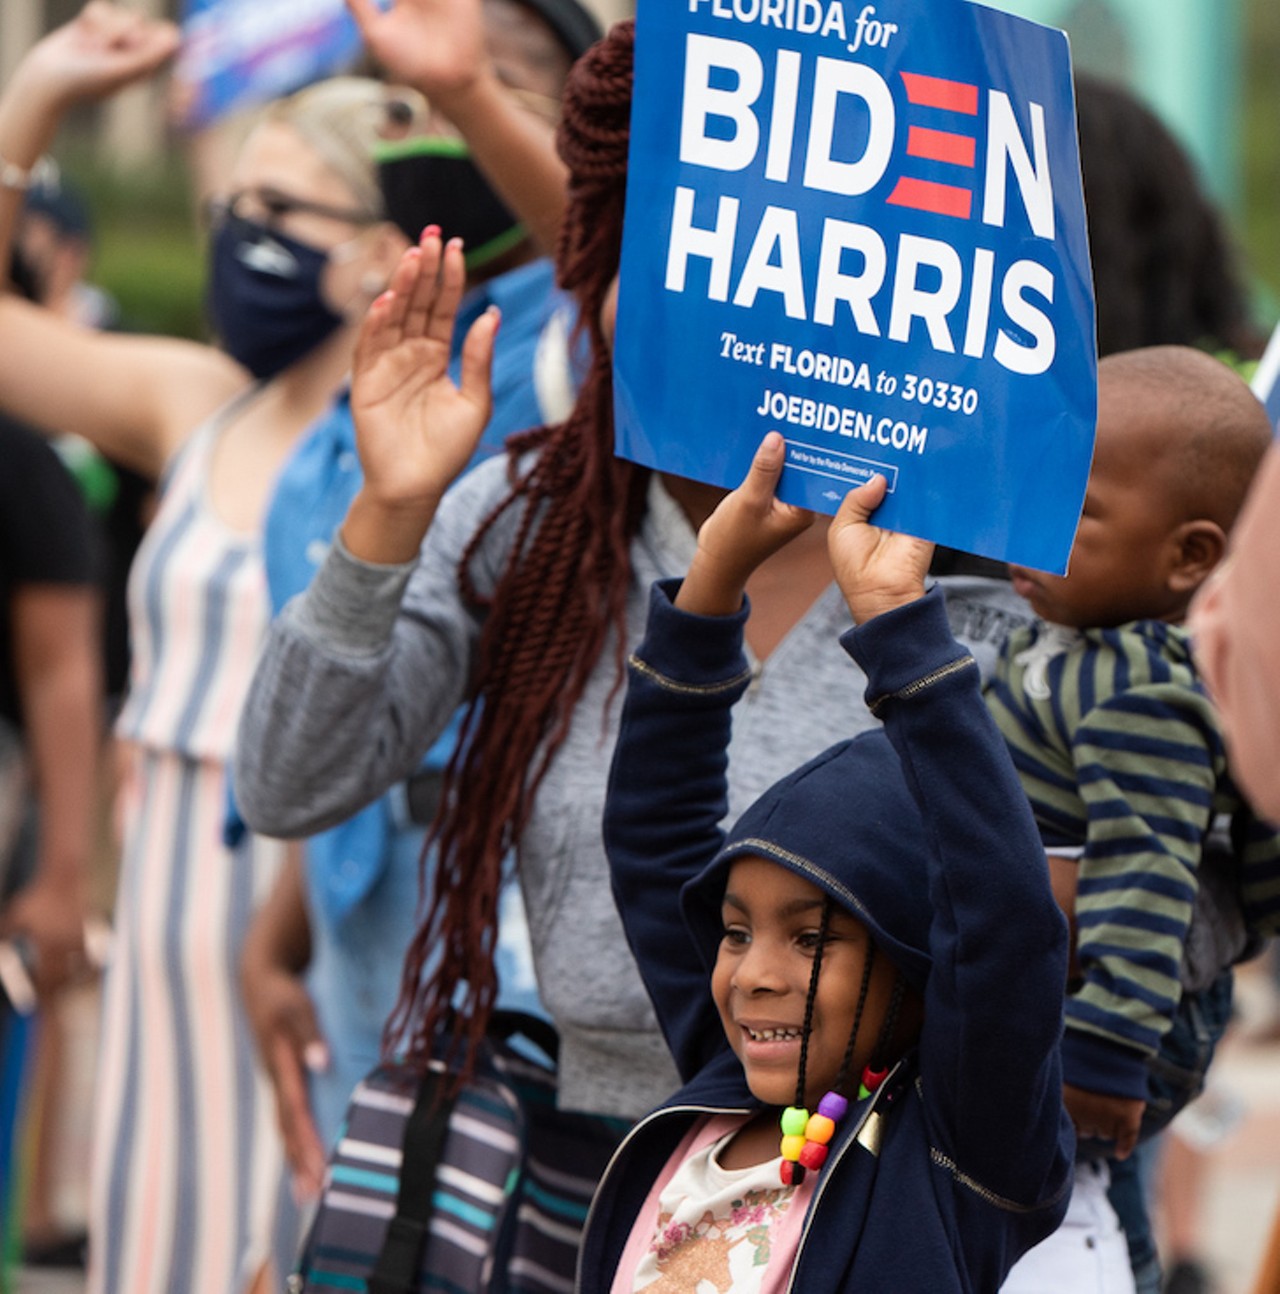 18 joyful photos from the day in Orlando that Biden was announced our 46th president